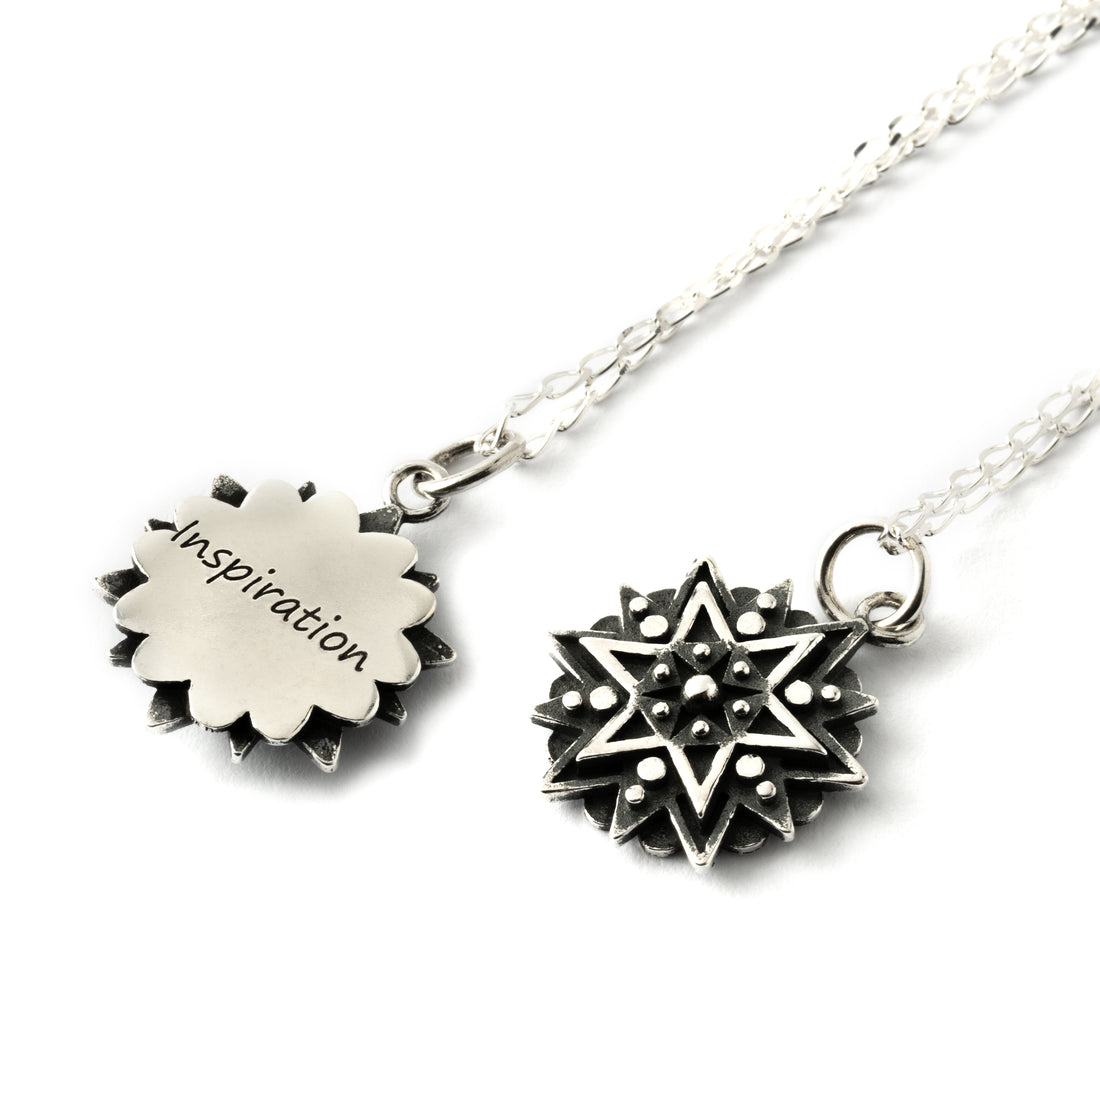 Inspiration Star Charm both sides view, star ornament on the front and &quot;inspiration&quot; text on the back